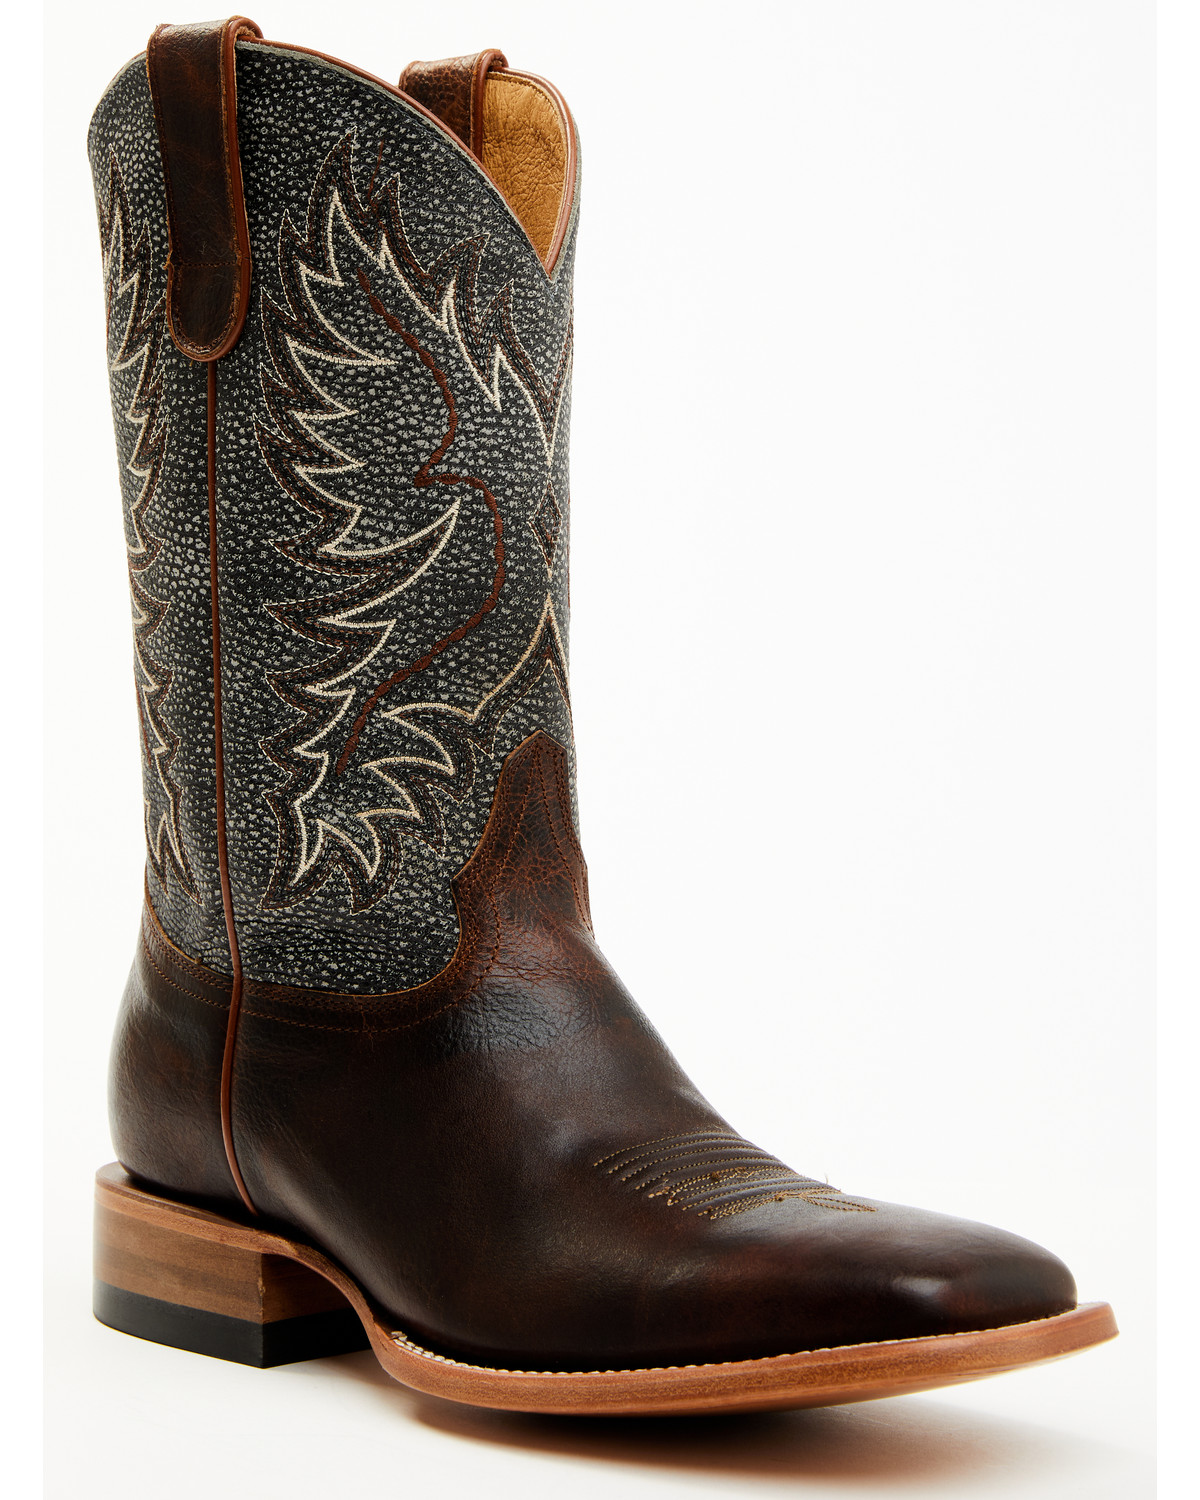 Cody James Men's Montana Western Boots - Wide Square Toe | Sheplers